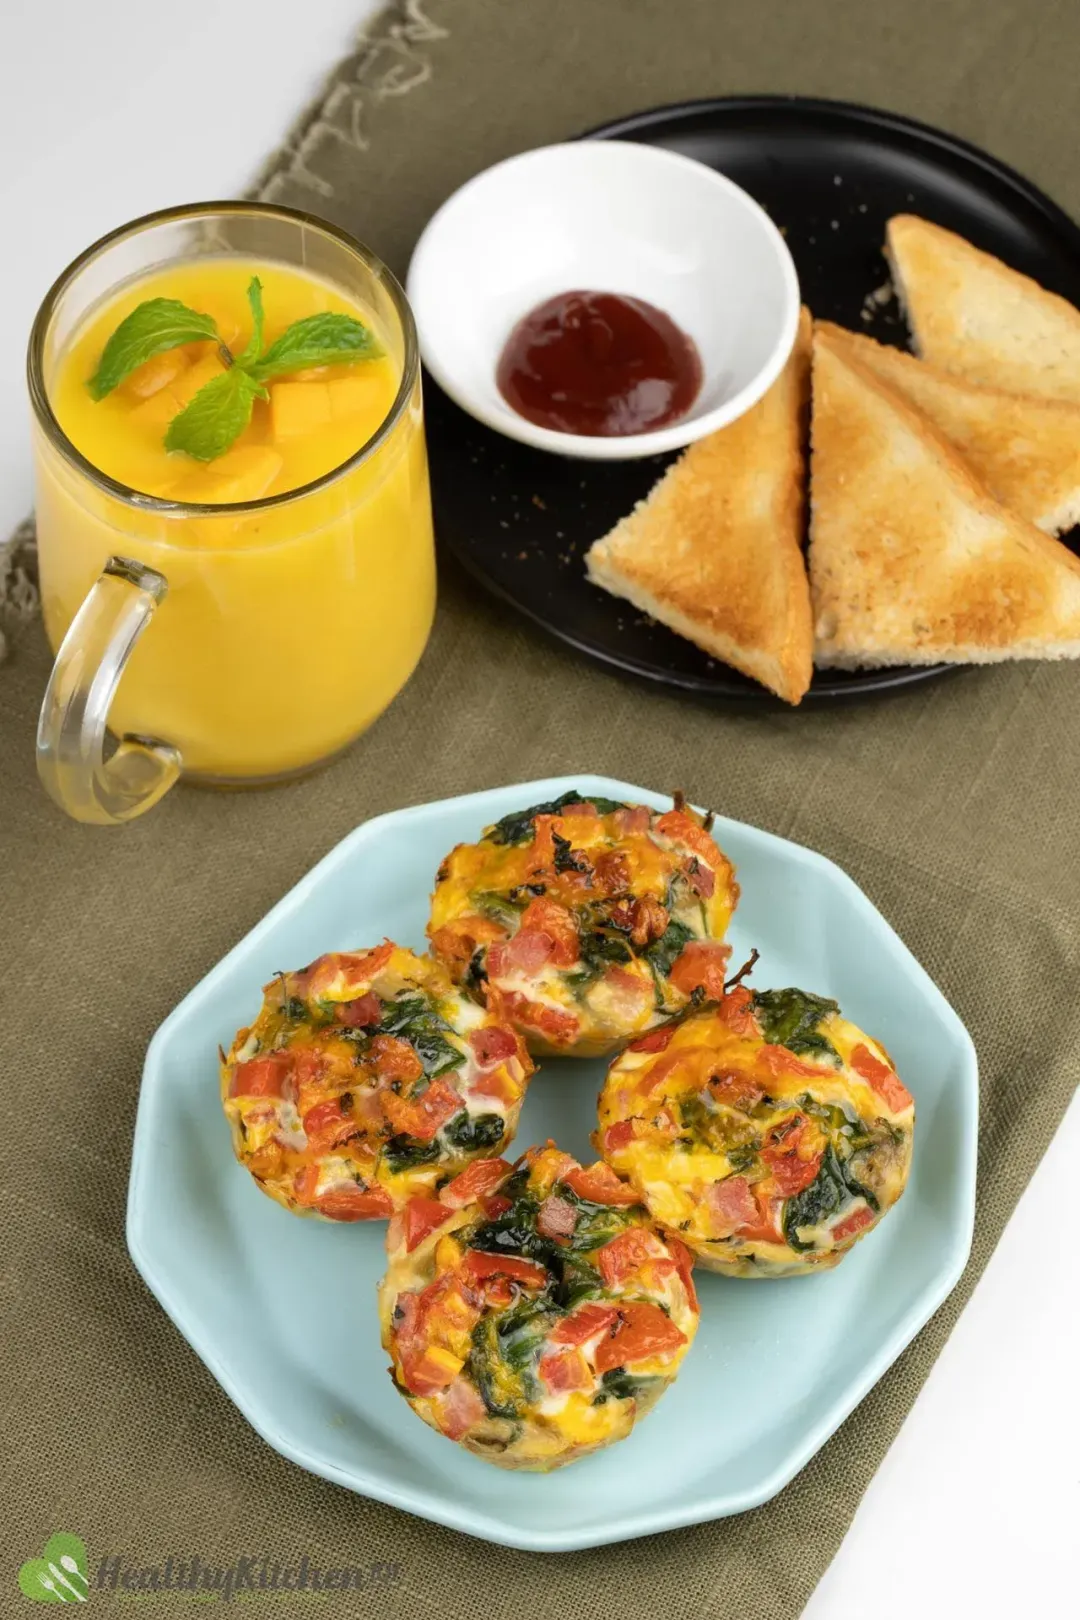 What to Serve With Egg Muffins